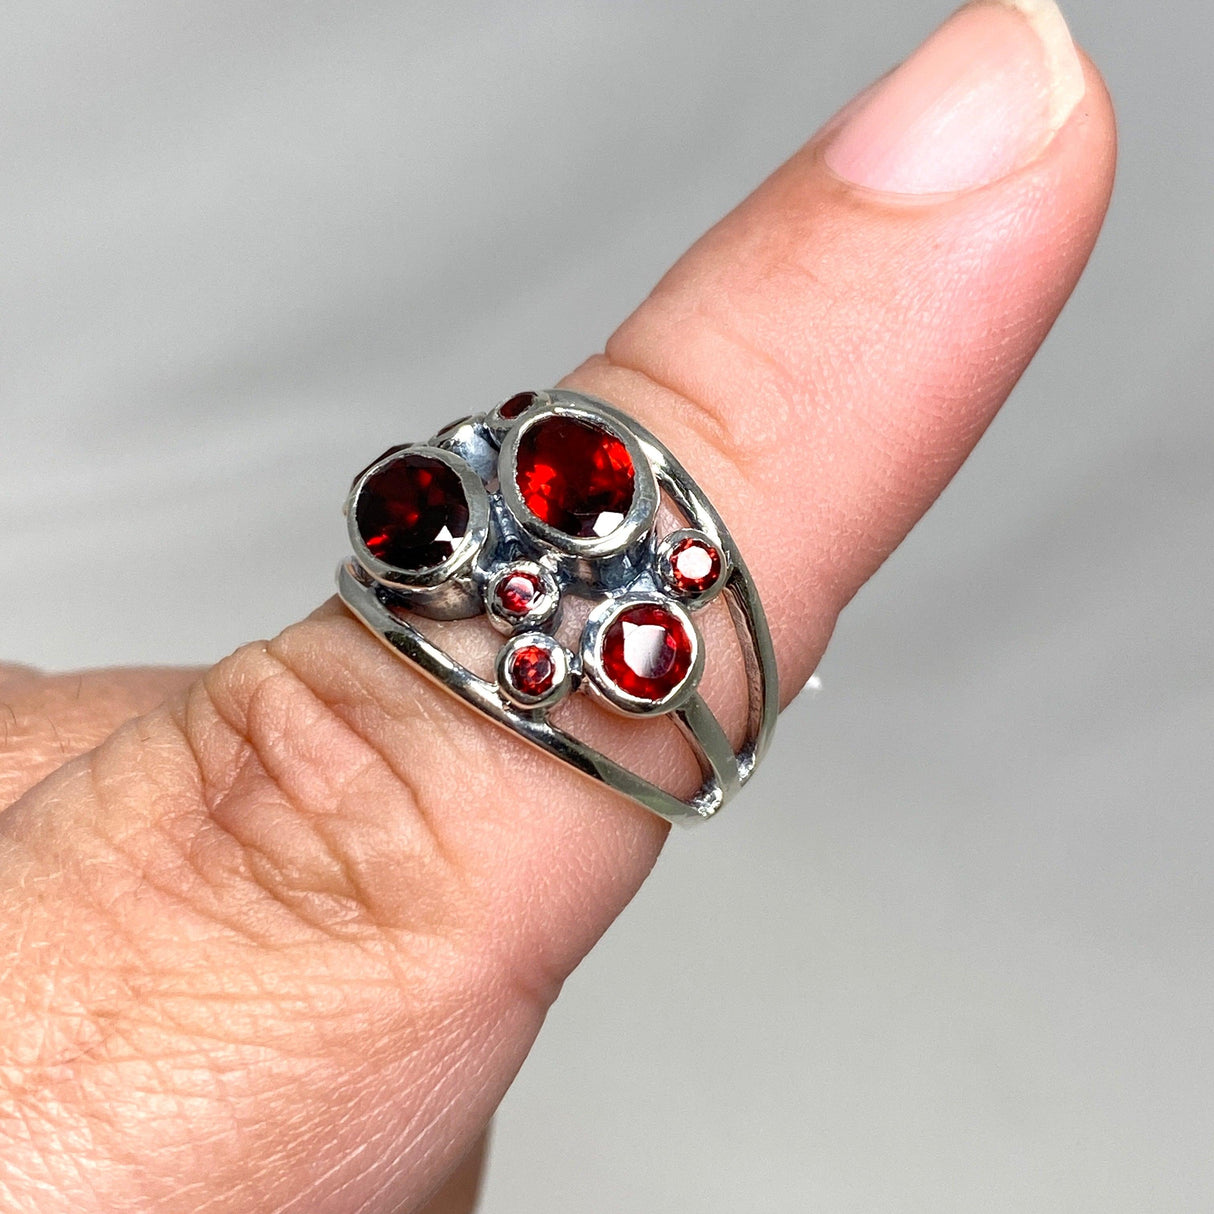 Garnet Faceted Multistone Gemstone Ring in a Decorative Setting R3787 - Nature's Magick